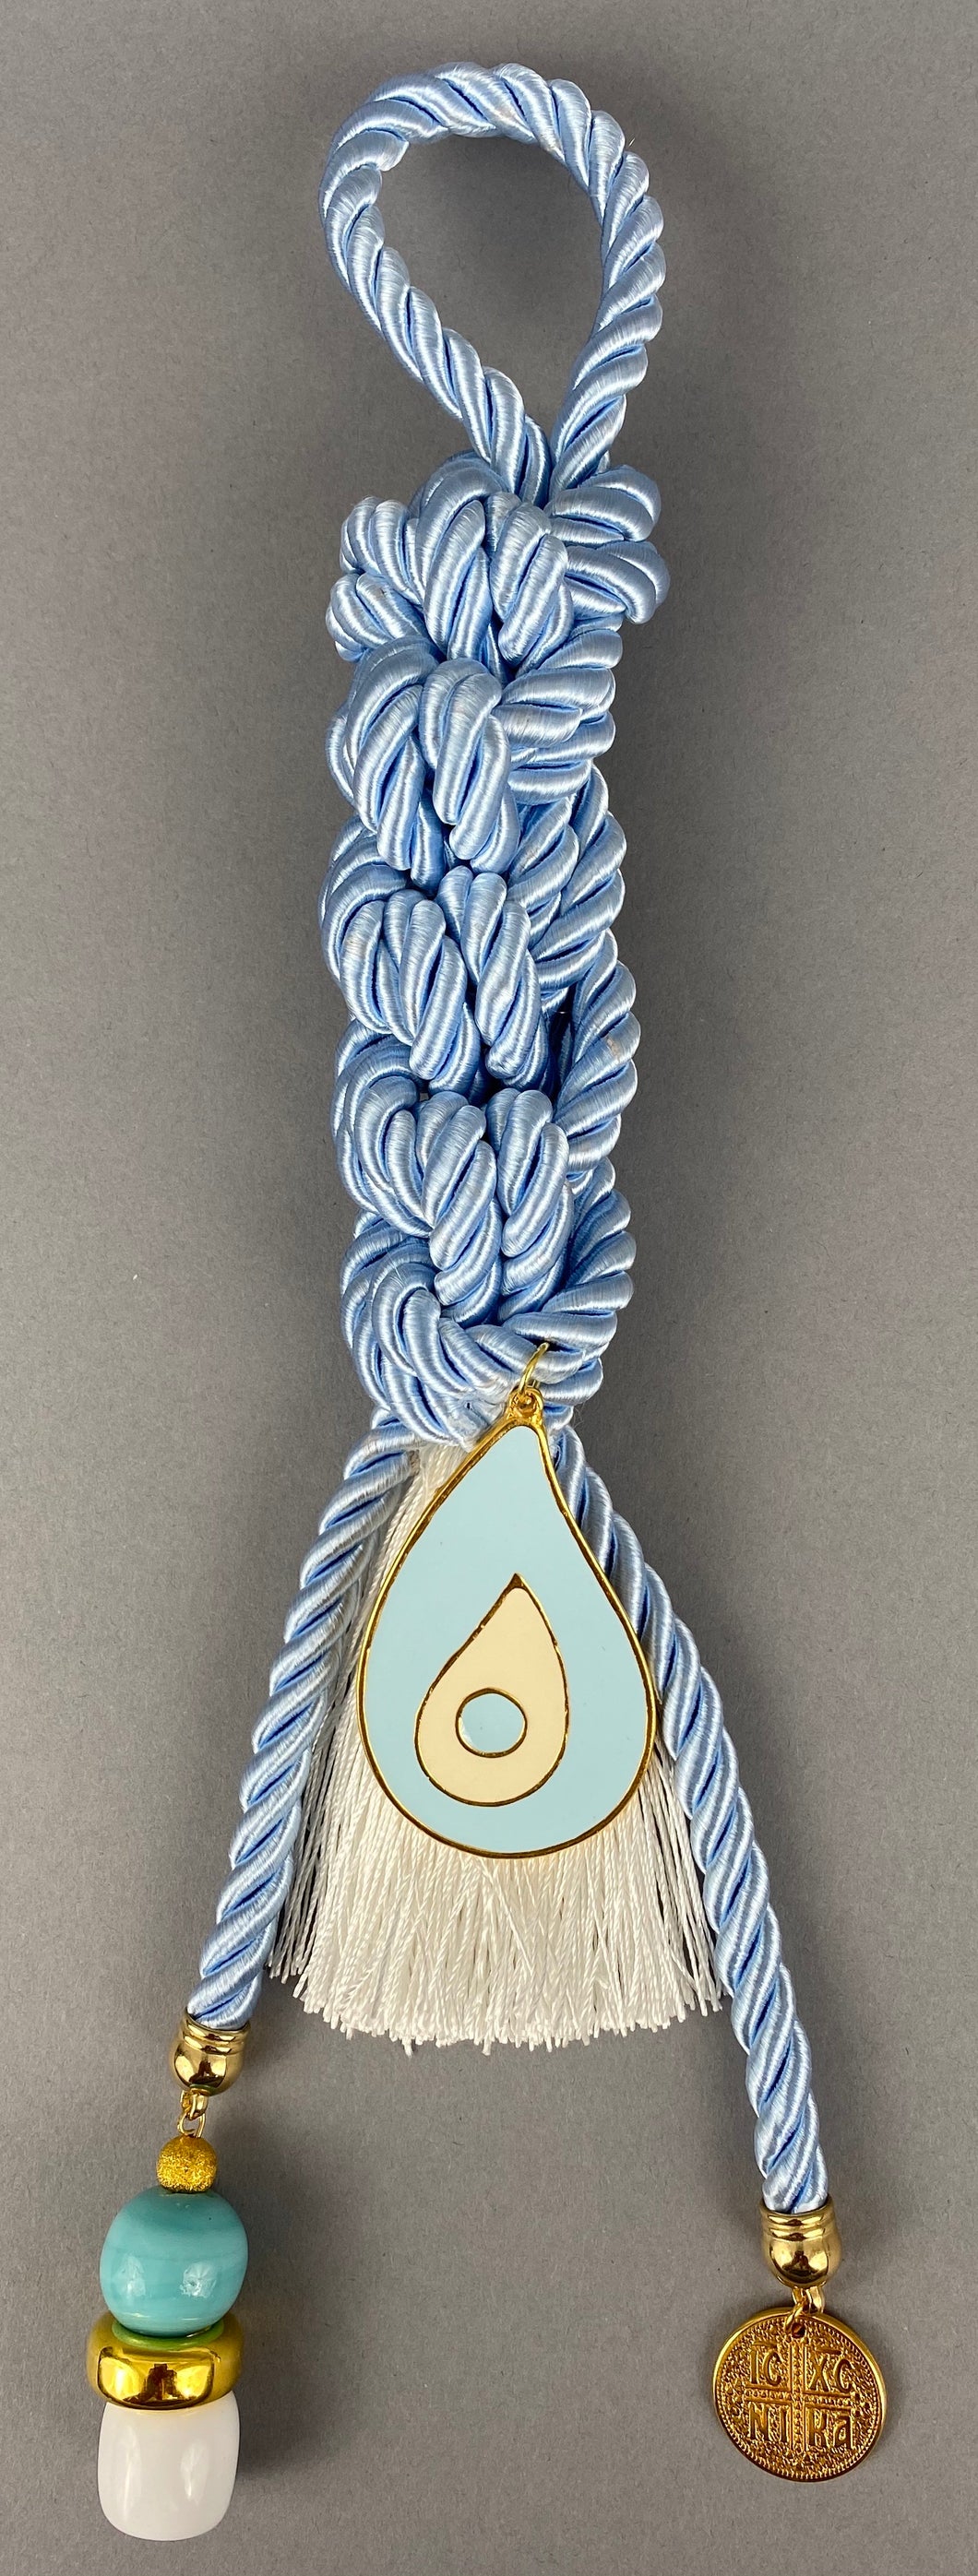 Gouri 1002 Pearl Baby Blue Cord Gouri, large metal Mati, double sided  Konstantinata  pendant, large beads and white Tassel.  Measures 13.5” in length.